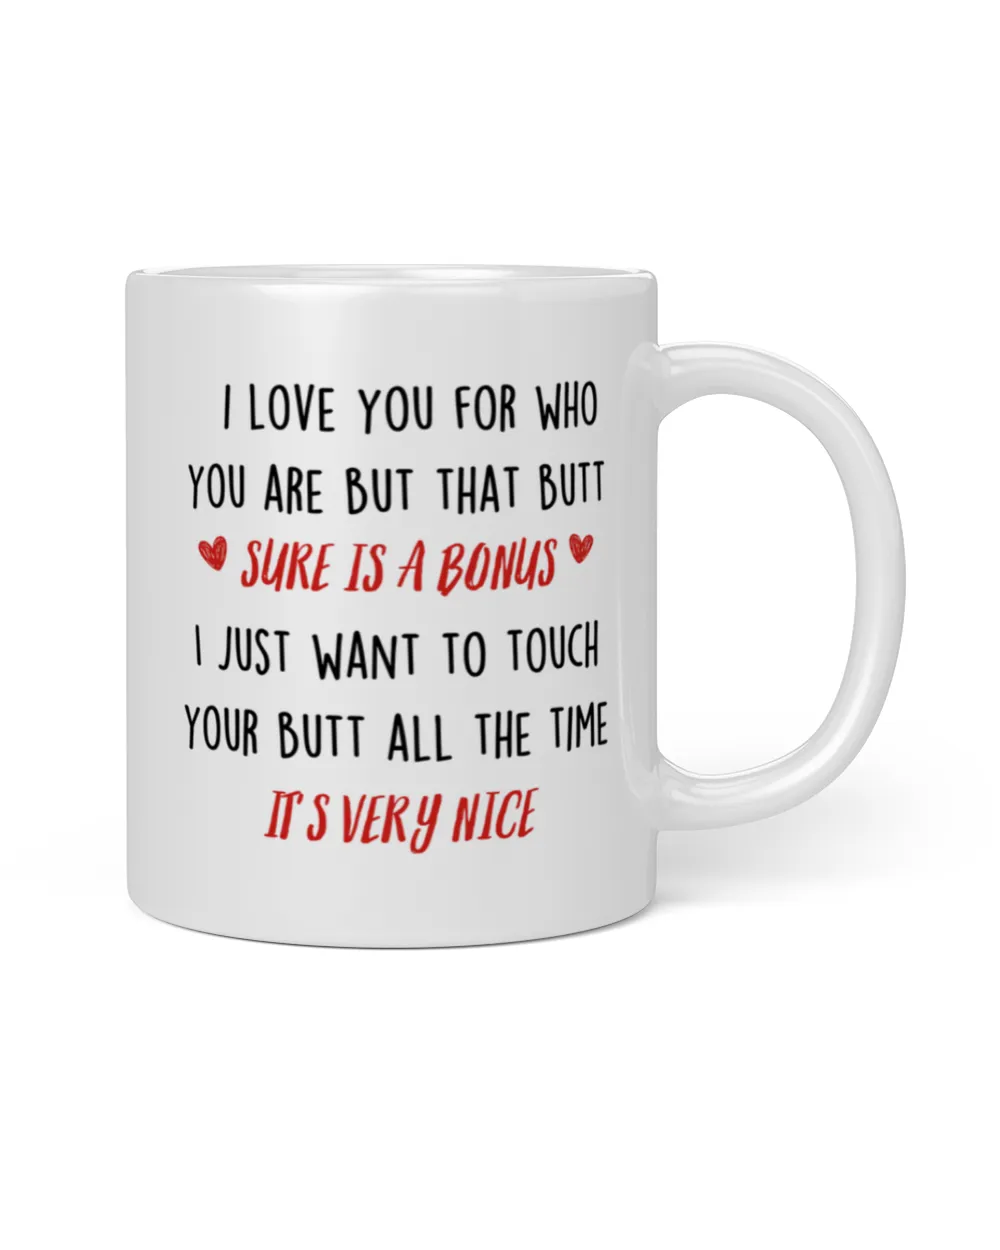 I love you for who you are but that butt sure is a bonus Valentine's Day Gift To Your Love